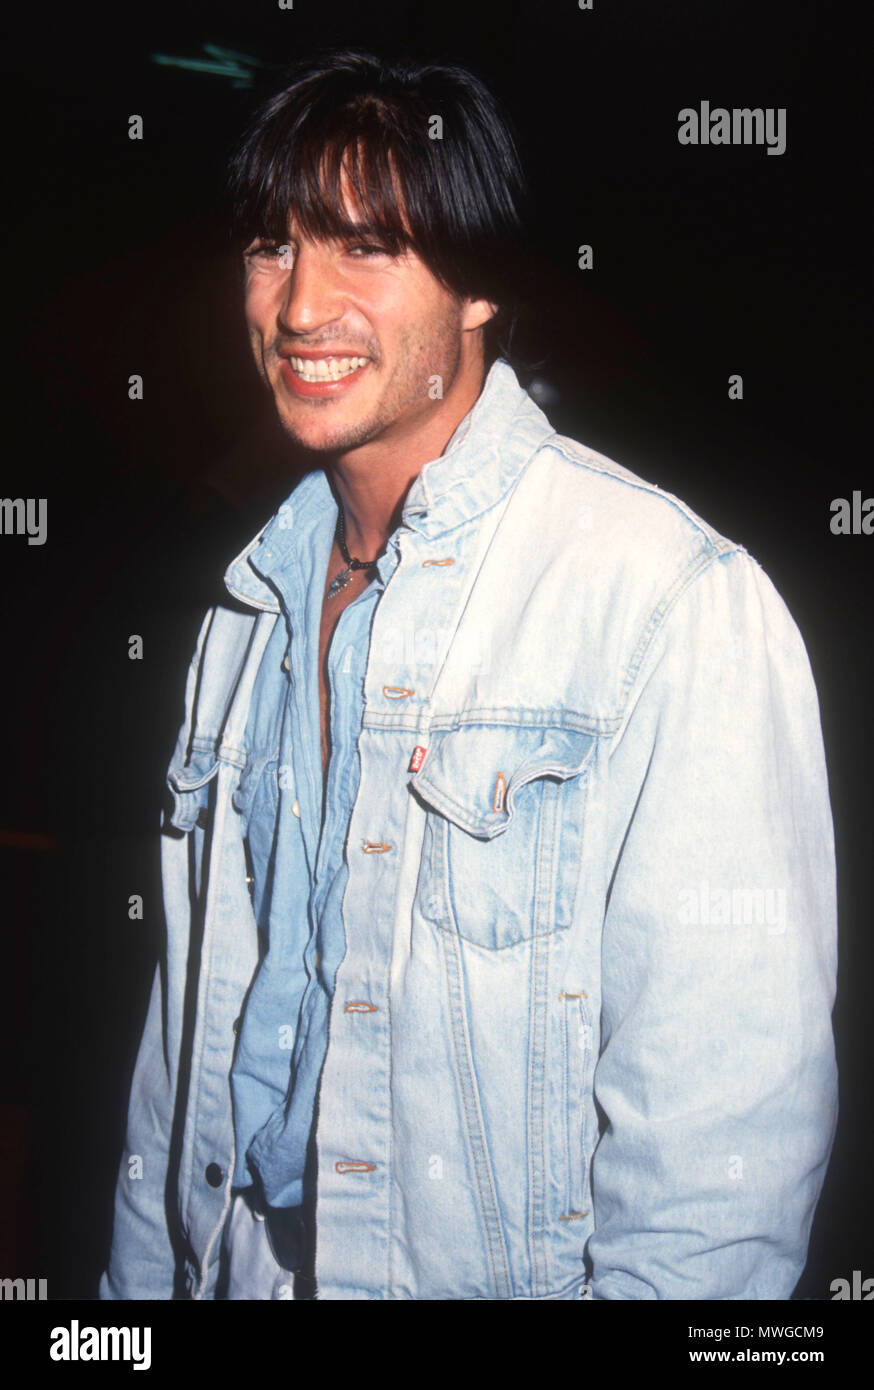 HOLLYWOOD, CA - JULY 11: Actor Billy Wirth attends the 'Bill & Ted's Bogus Journey' Hollywood Premiere on July 11, 1991 at Mann's Chinese Theatre in Hollywood, California. Photo by Barry King/Alamy Stock Photo Stock Photo